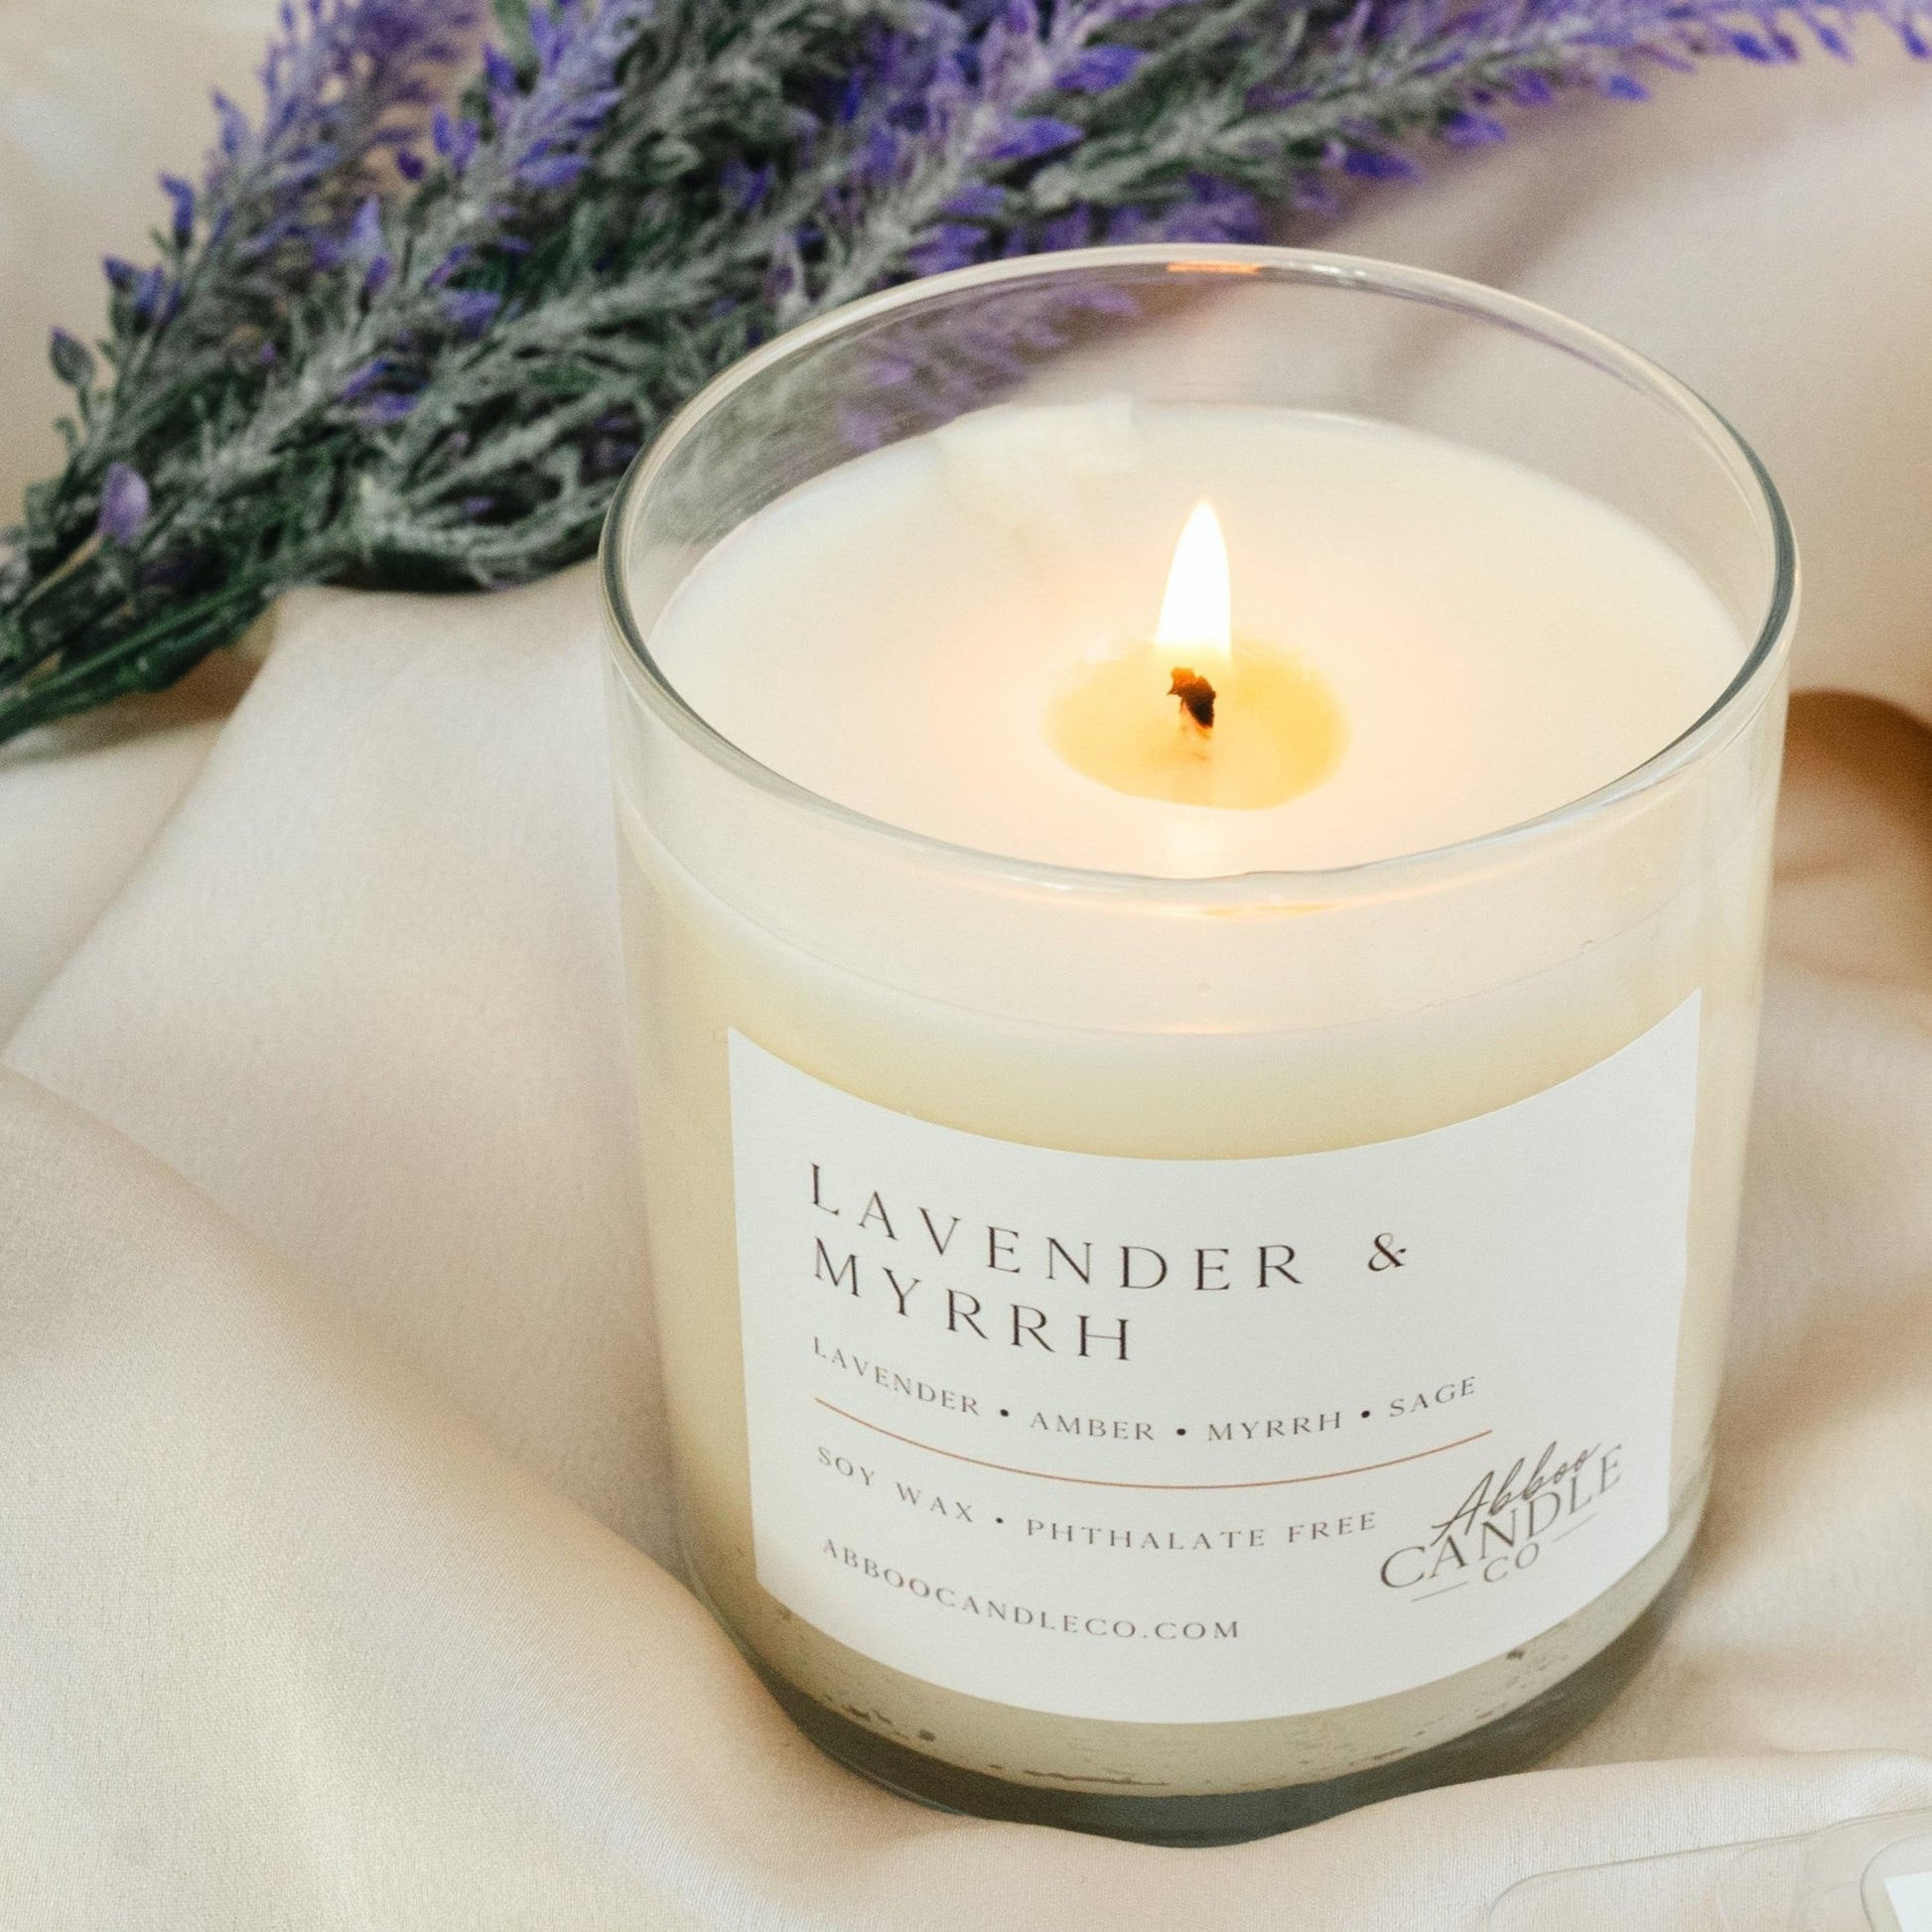 Lavender and Myrrh Tumbler Soy Candle - Abboo Candle Co